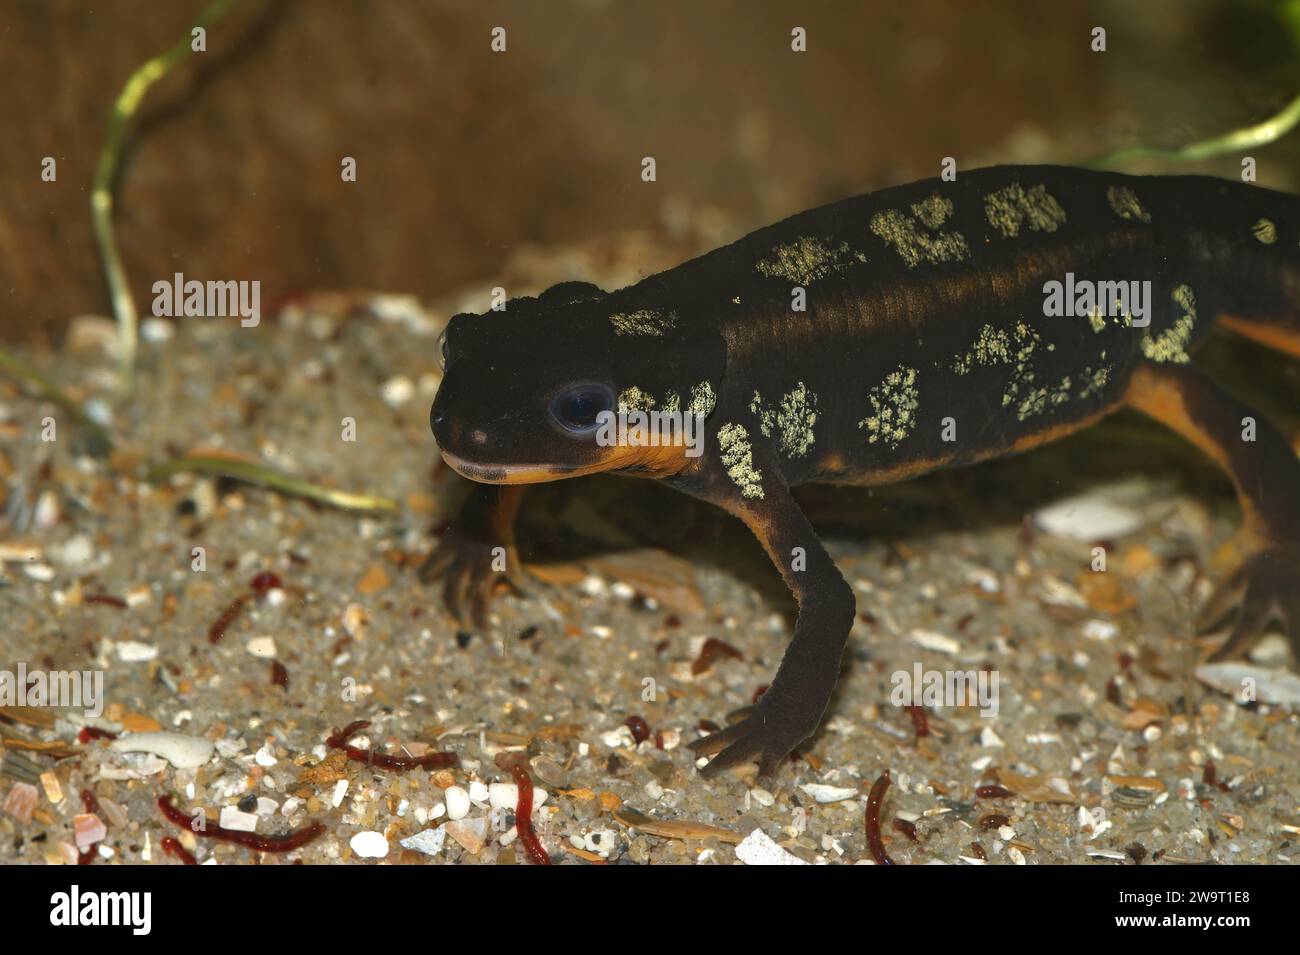 Detailed closeup on the colorful but endangered Japanese Riu-Kiu newt, Cynops ensicauda popei under water Stock Photo